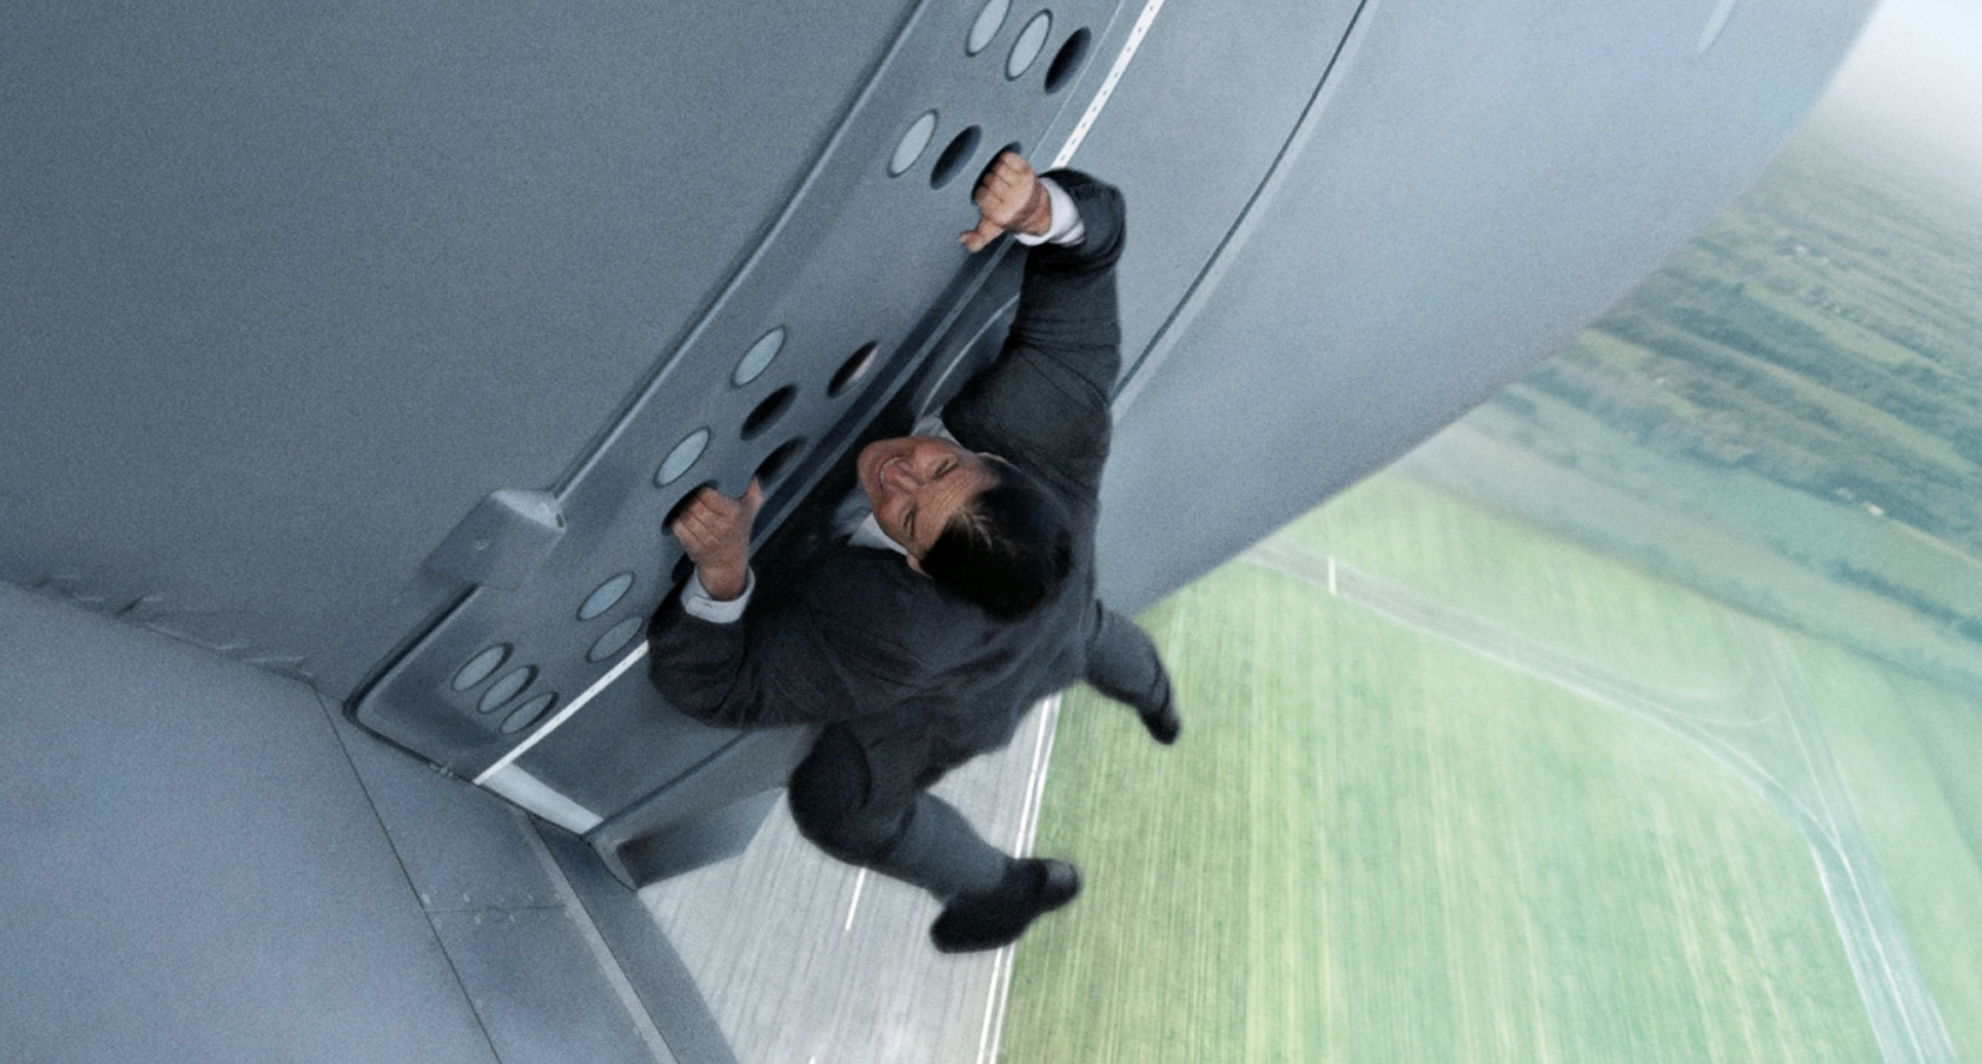 tom cruise own stunts mission impossible